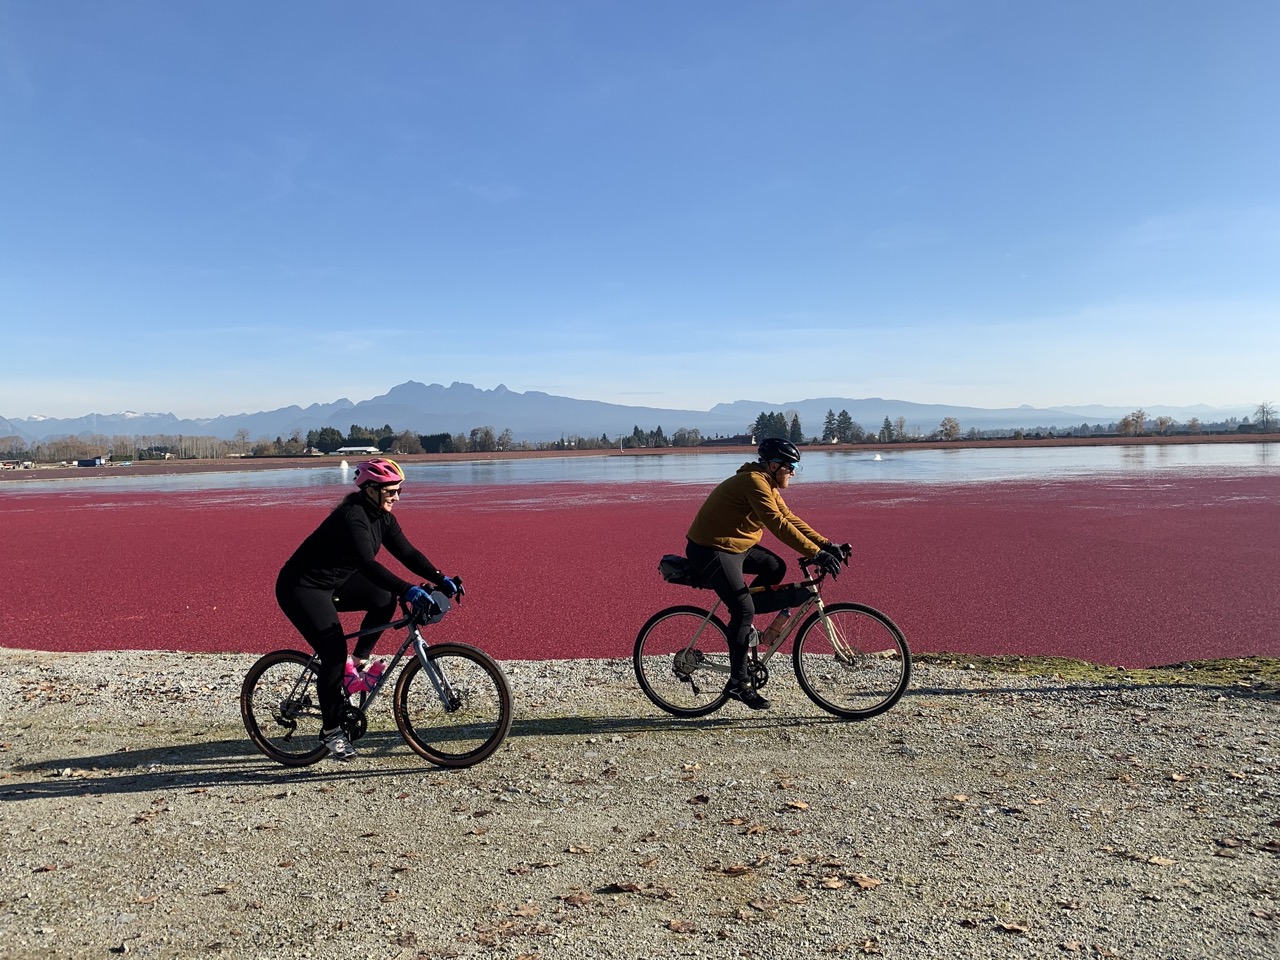 Cyclists ride past a flooded cranberry field near Vancouver